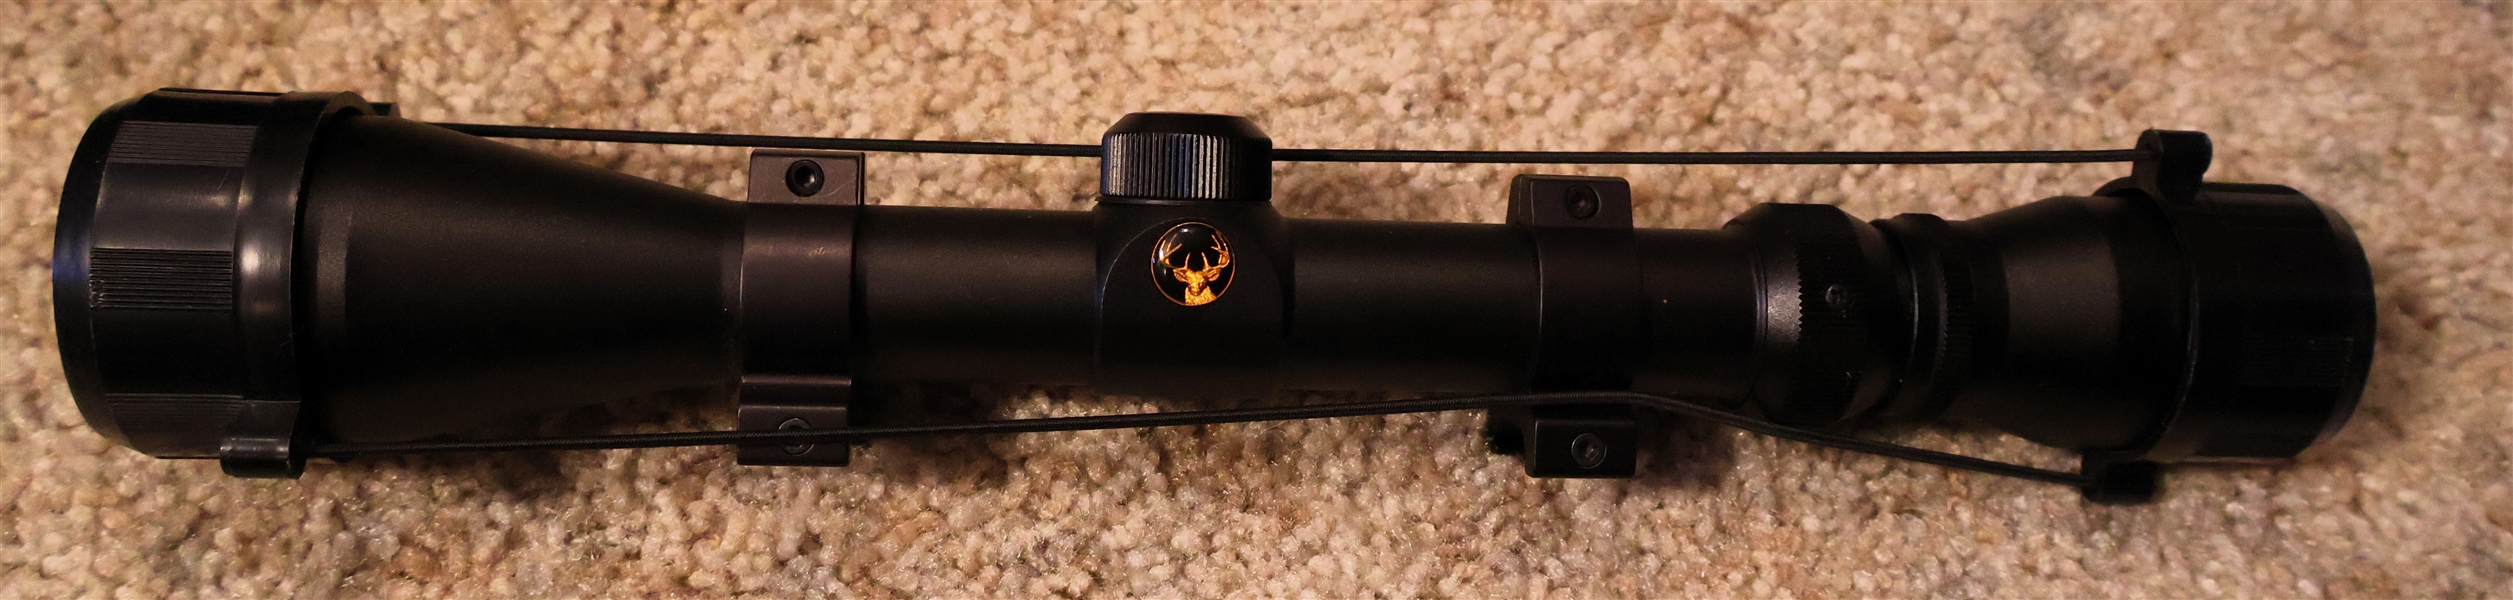 Simmons 8 Point Scope 3-9 x 40 - Fully Coated - Serial # 800722 - With Lens Covers 